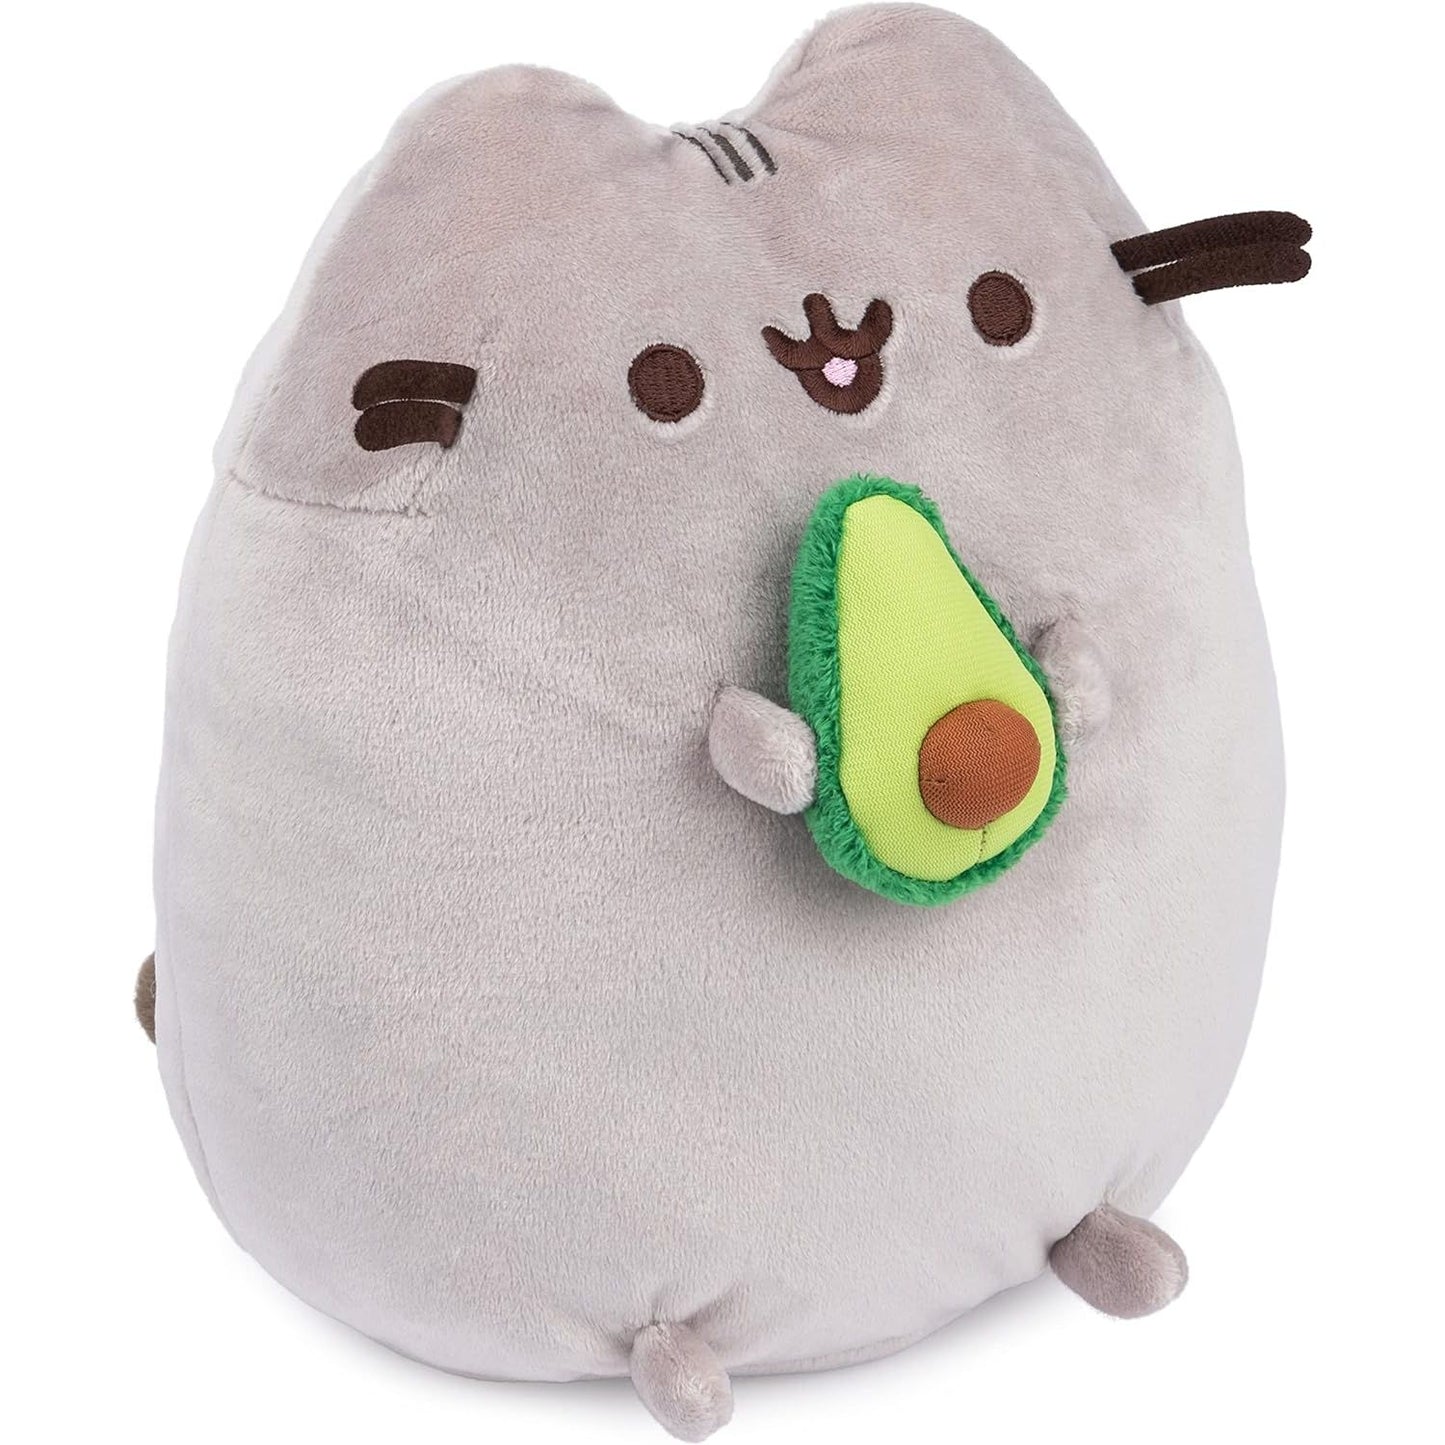 GUND Pusheen Snackable Avocado Plush, Stuffed Animal for Ages 8 and Up, 9.5”, Gray